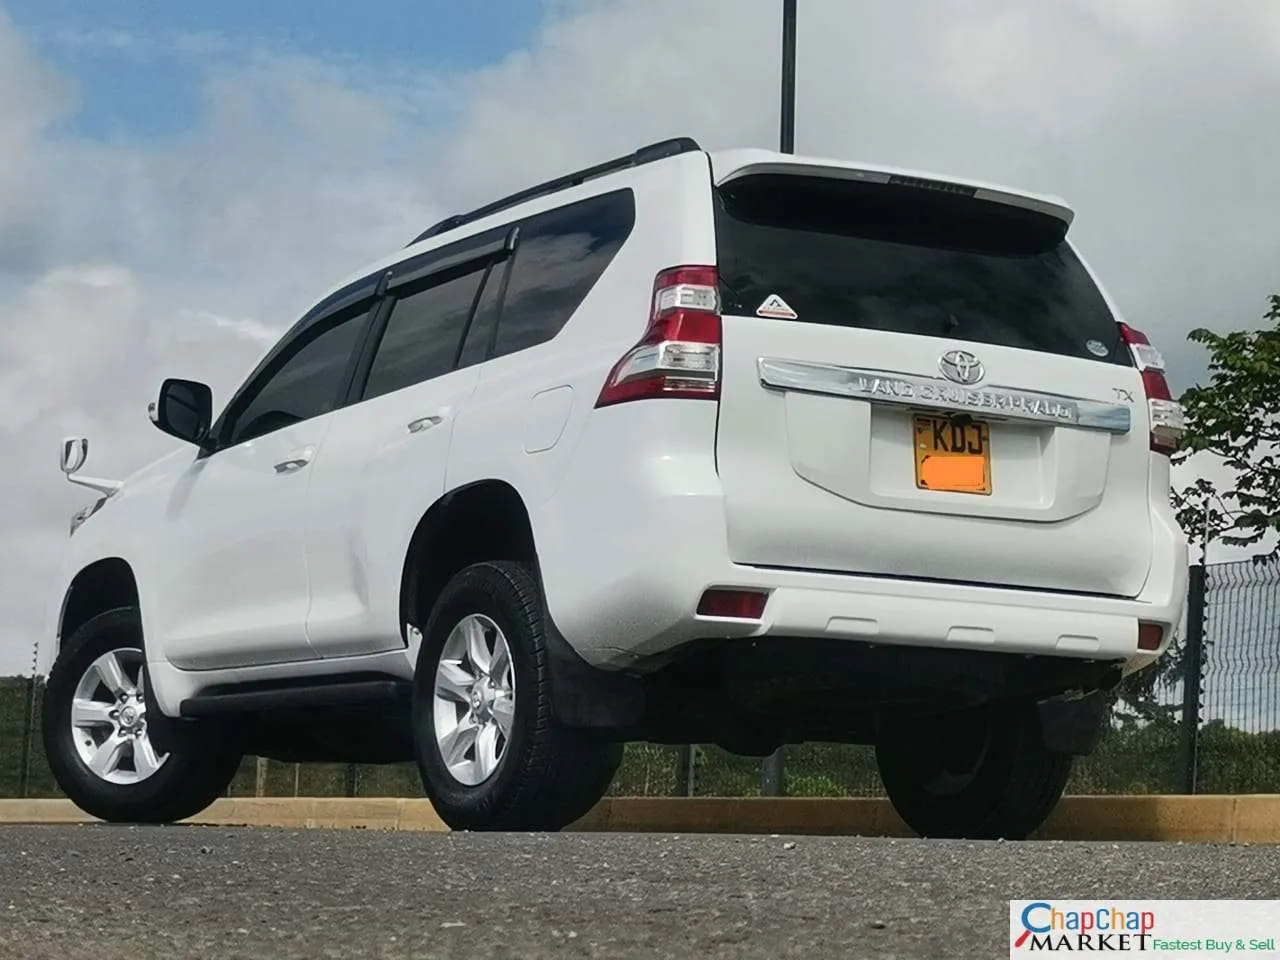 Toyota Prado j150 QUICKEST 🔥 You Pay 40% Deposit Trade in OK EXCLUSIVE Toyota Prado for sale in kenya hire purchase installments EXCLUSIVE